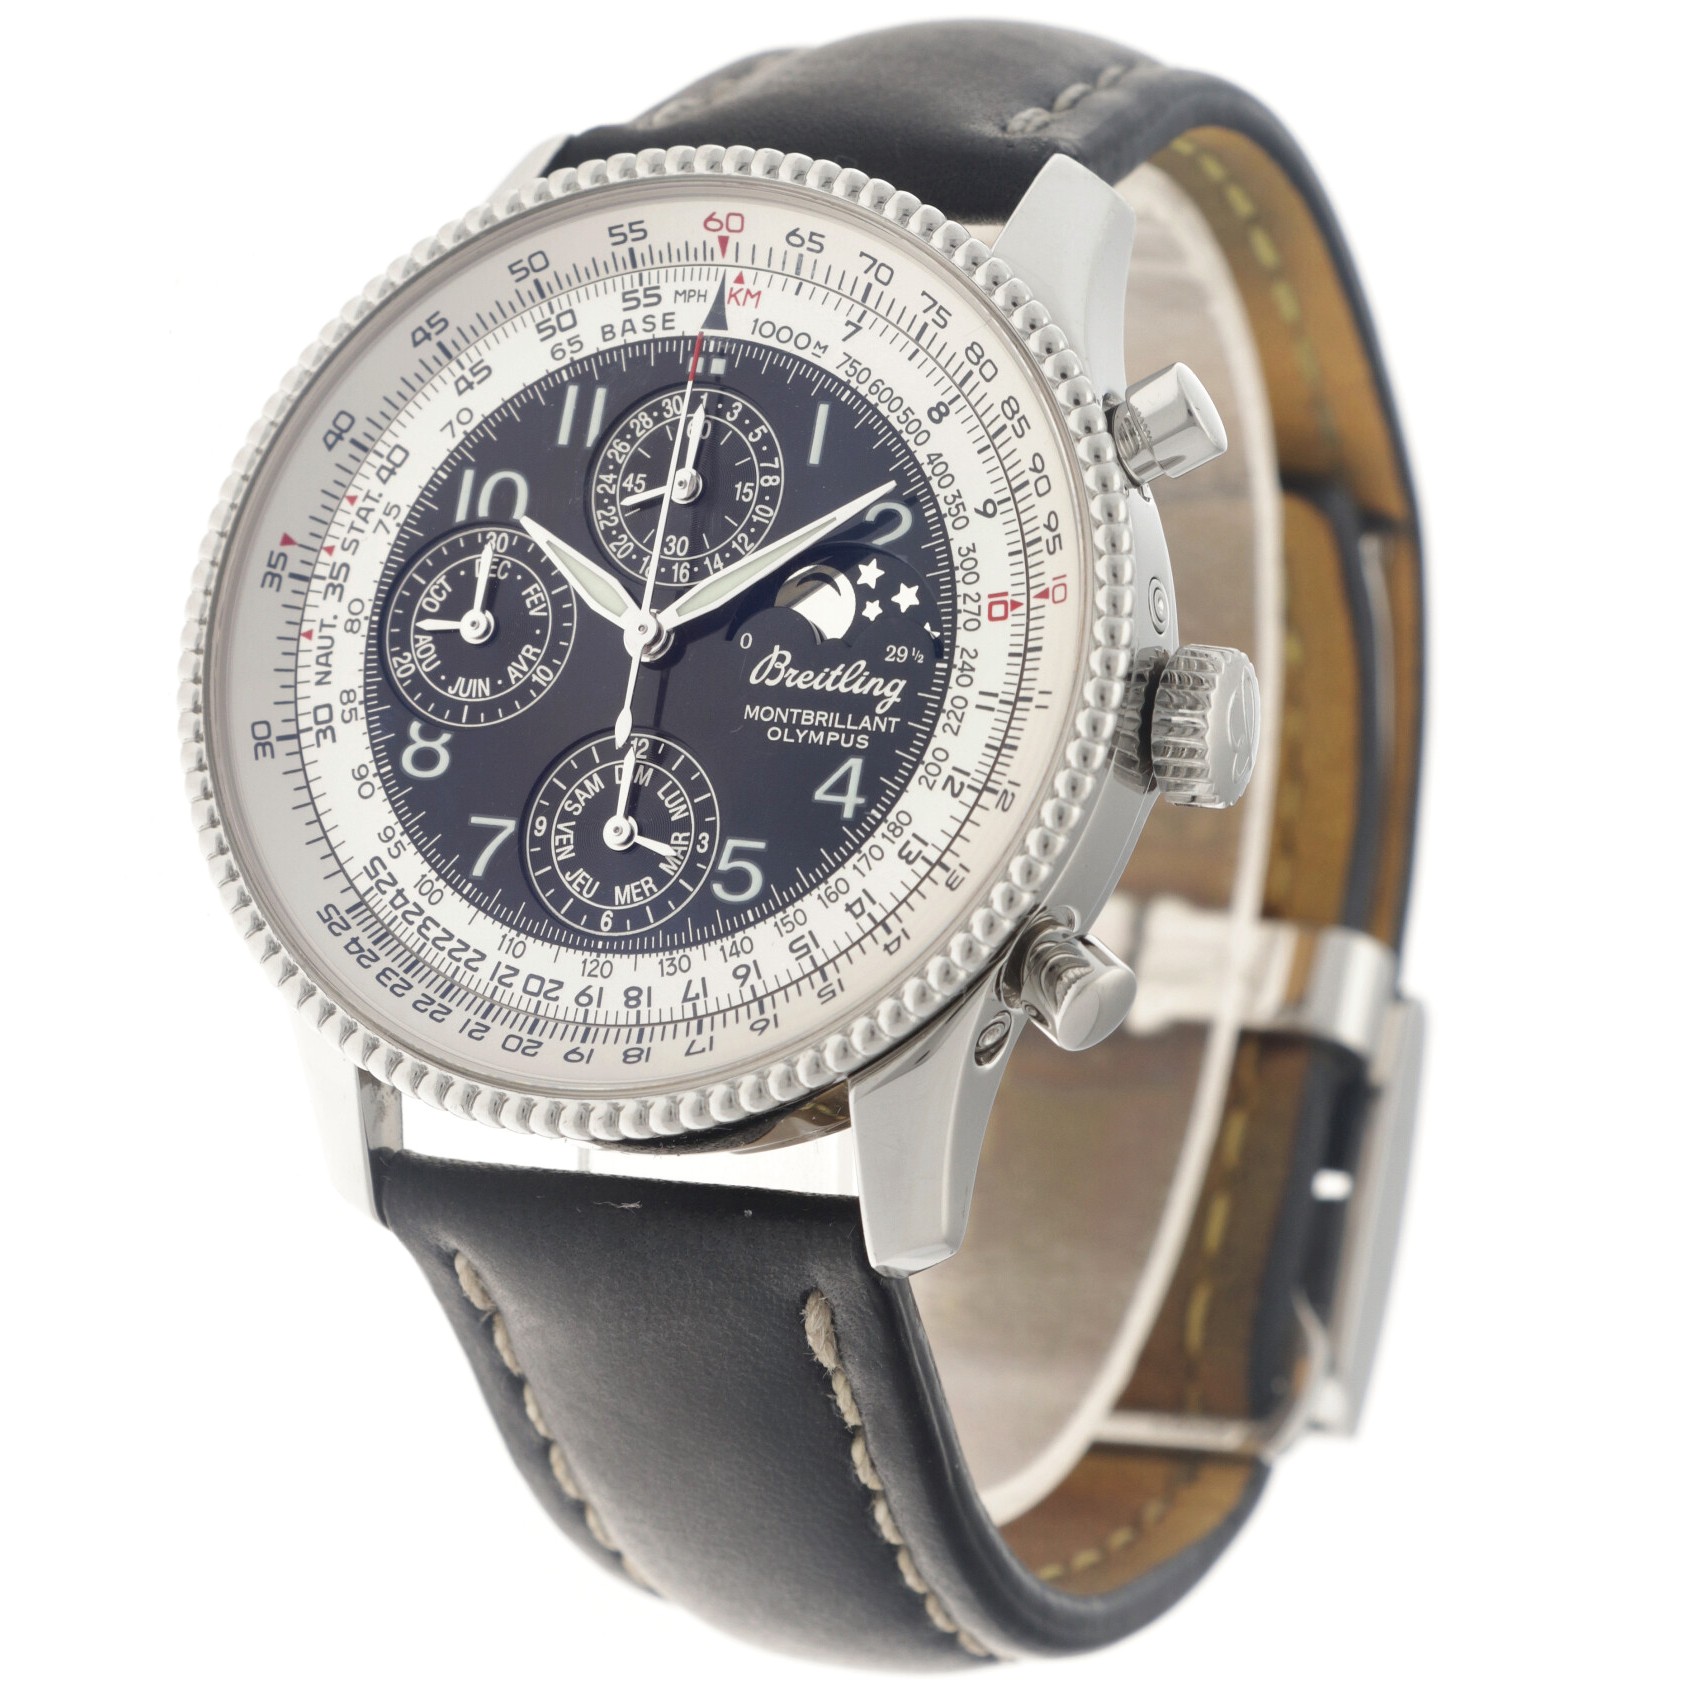 Breitling Montbrilliant Olympus A19350 - Men's watch. - Image 2 of 6